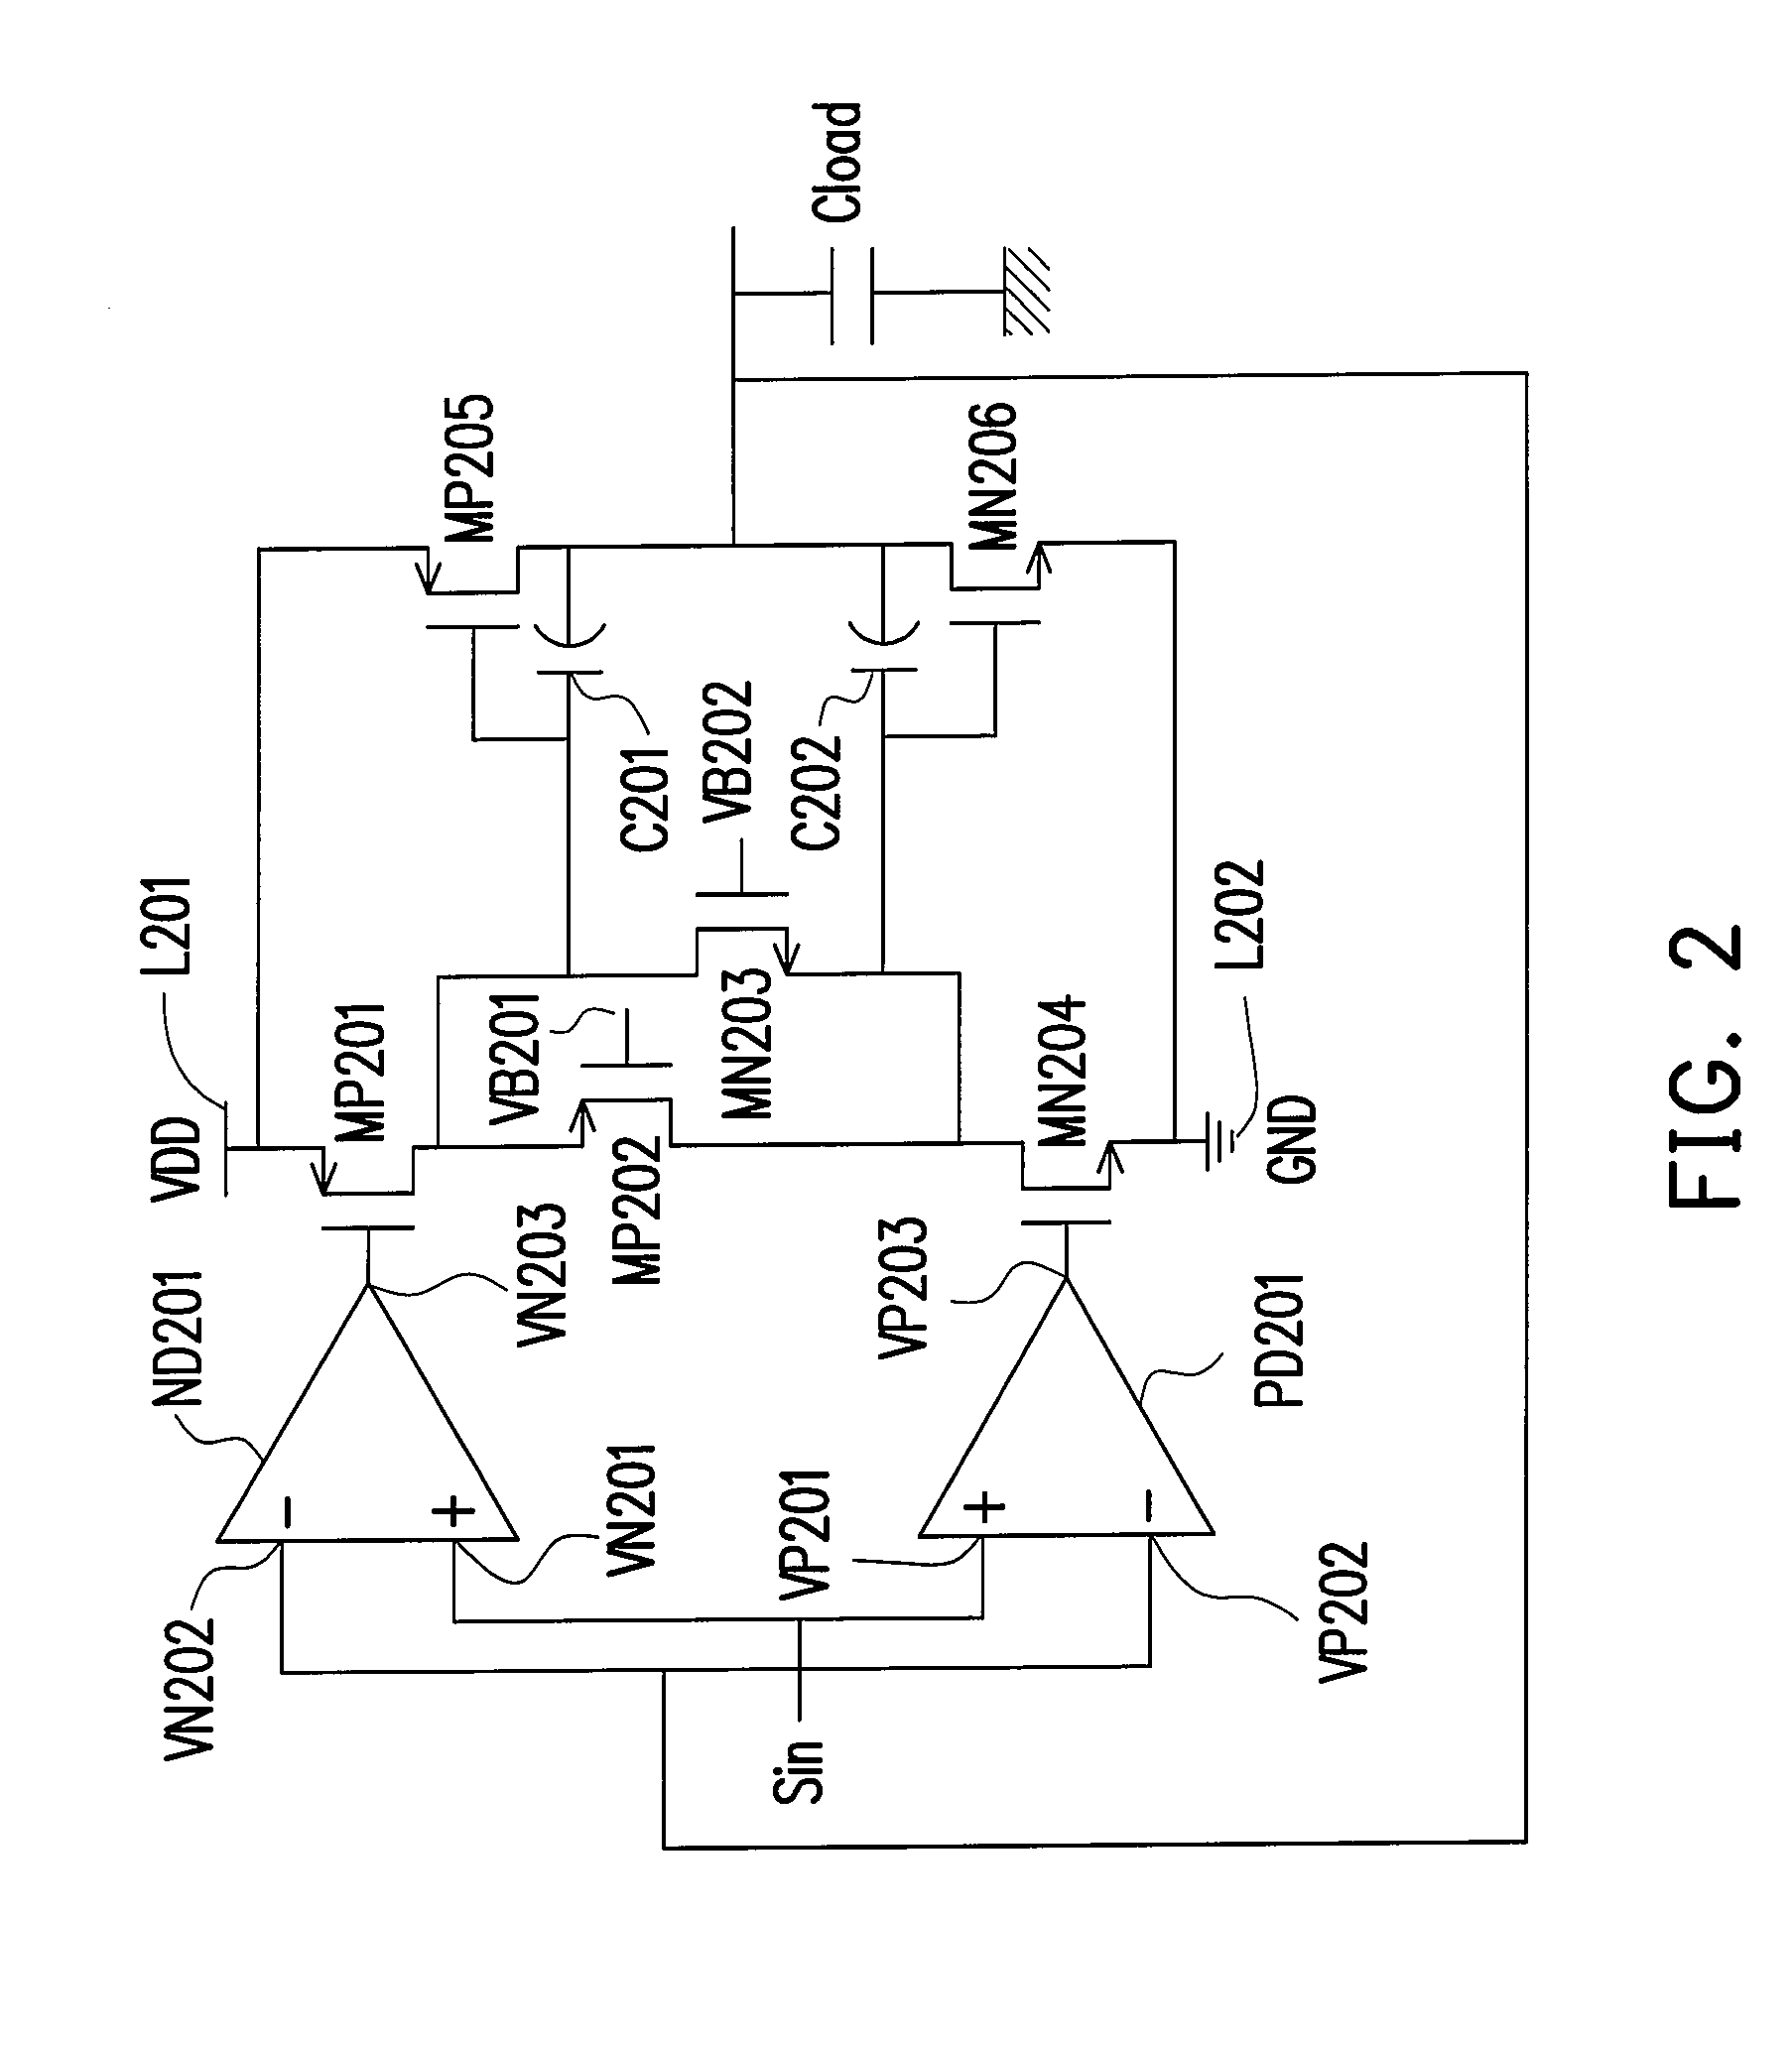 Buffer amplifier for source driver